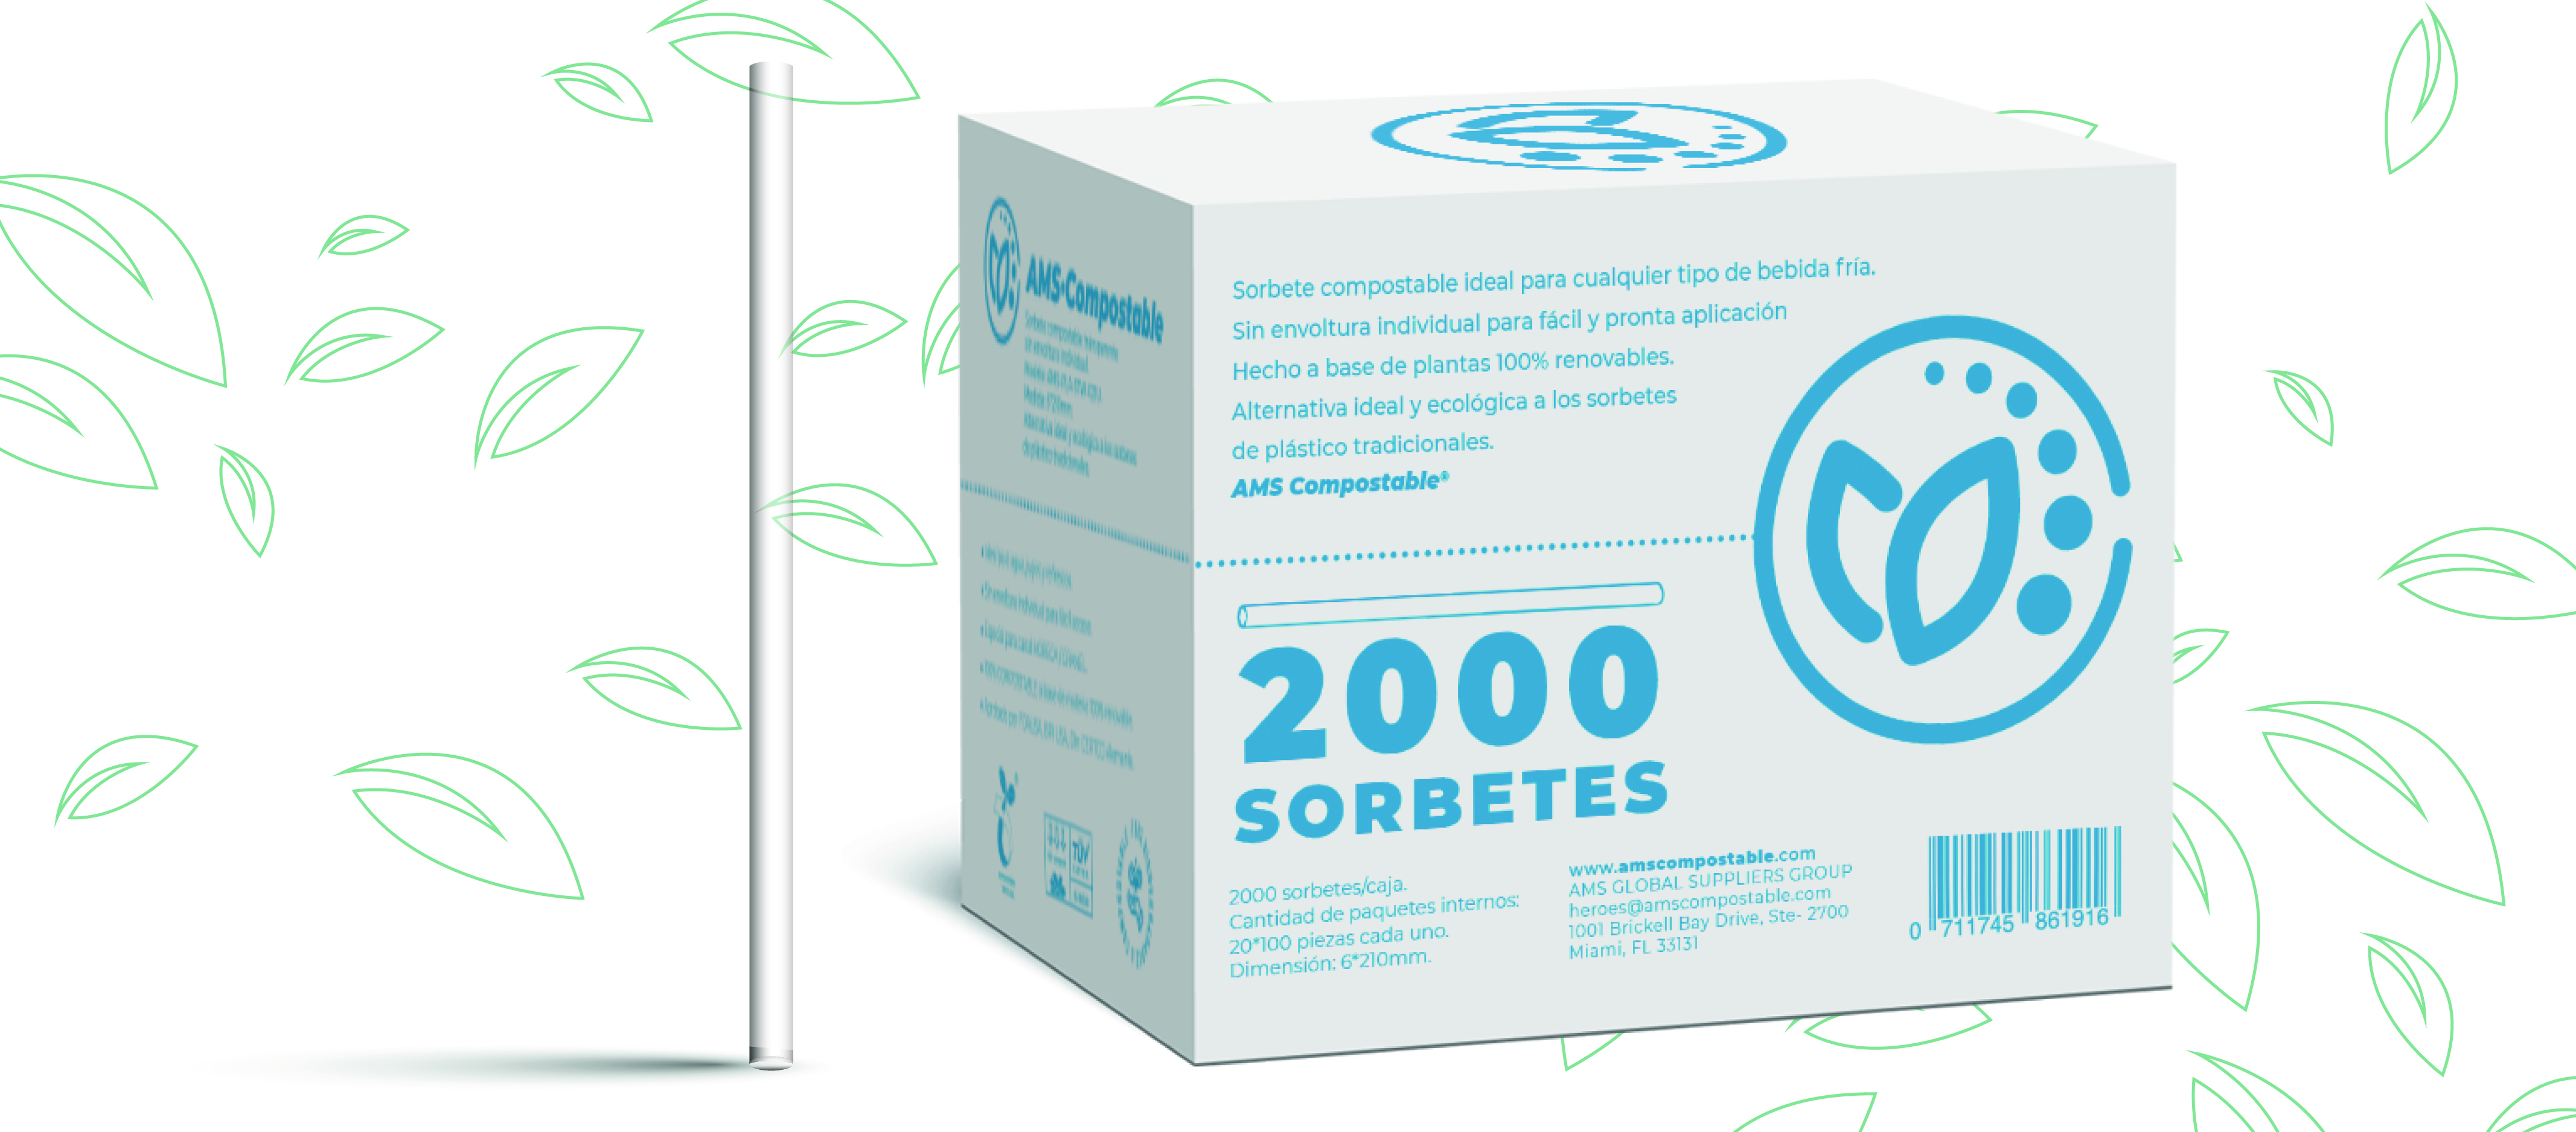 Productos Compostables – AMS Compostable